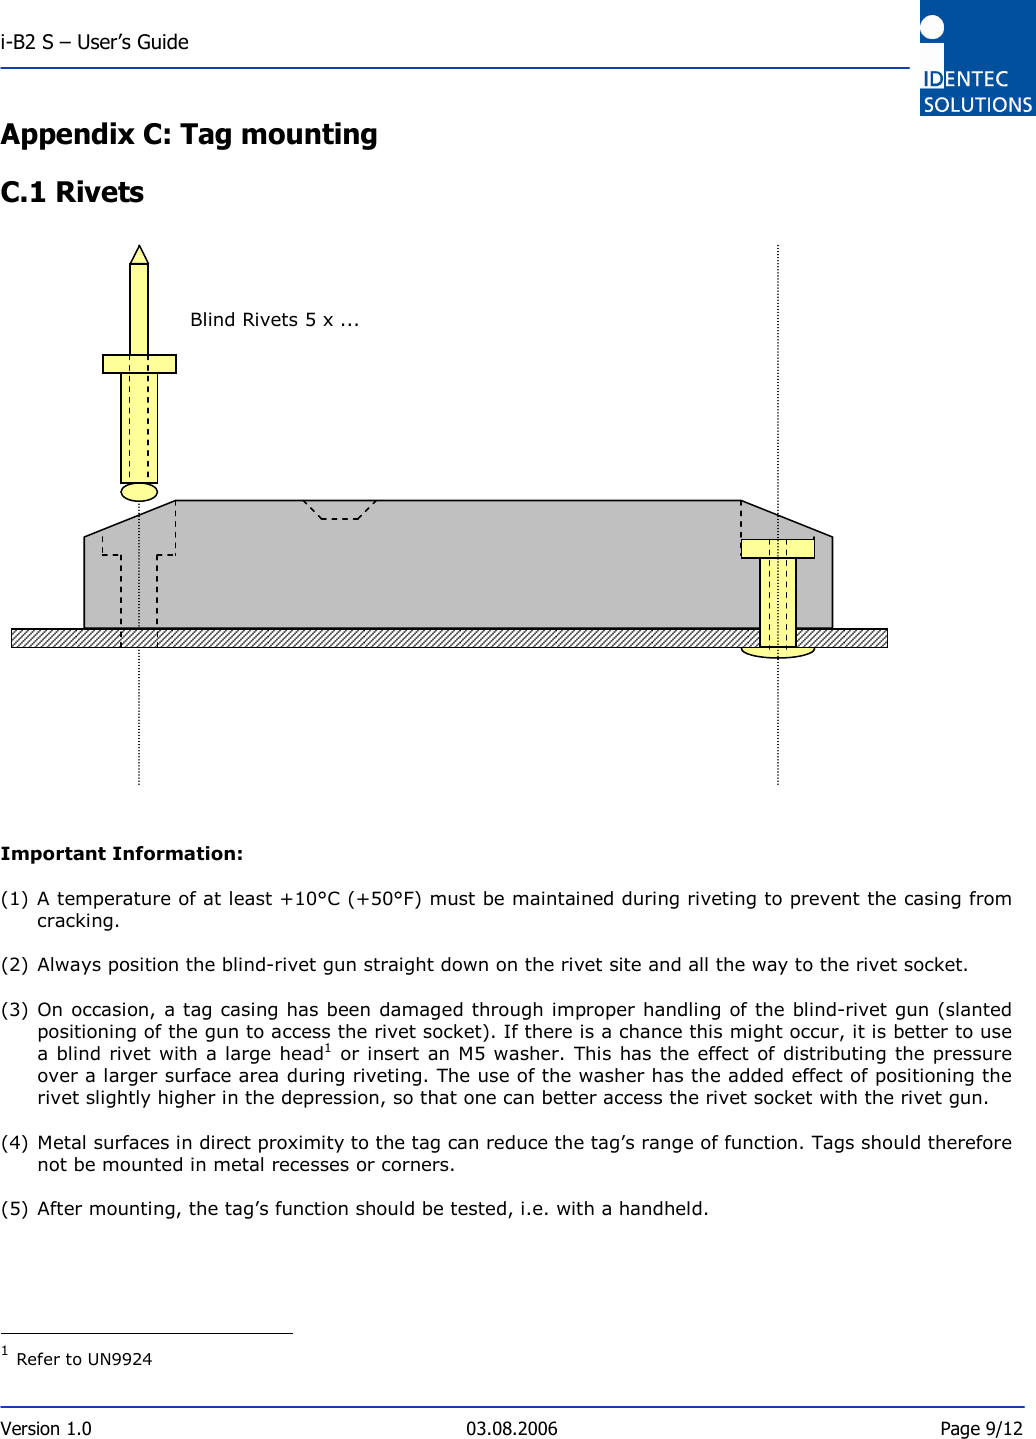  i-B2 S – User’s Guide  Version 1.0  03.08.2006  Page 9/12    Appendix C: Tag mounting C.1 Rivets                             Important Information:  (1) A temperature of at least +10°C (+50°F) must be maintained during riveting to prevent the casing from cracking.   (2) Always position the blind-rivet gun straight down on the rivet site and all the way to the rivet socket.    (3) On occasion, a tag casing has been damaged through improper handling of the blind-rivet gun (slanted positioning of the gun to access the rivet socket). If there is a chance this might occur, it is better to use a blind rivet with a large head1 or  insert an M5 washer. This has the effect  of distributing the pressure over a larger surface area during riveting. The use of the washer has the added effect of positioning the rivet slightly higher in the depression, so that one can better access the rivet socket with the rivet gun.   (4) Metal surfaces in direct proximity to the tag can reduce the tag’s range of function. Tags should therefore not be mounted in metal recesses or corners.   (5) After mounting, the tag’s function should be tested, i.e. with a handheld.                                             1 Refer to UN9924  Blind Rivets 5 x ... 